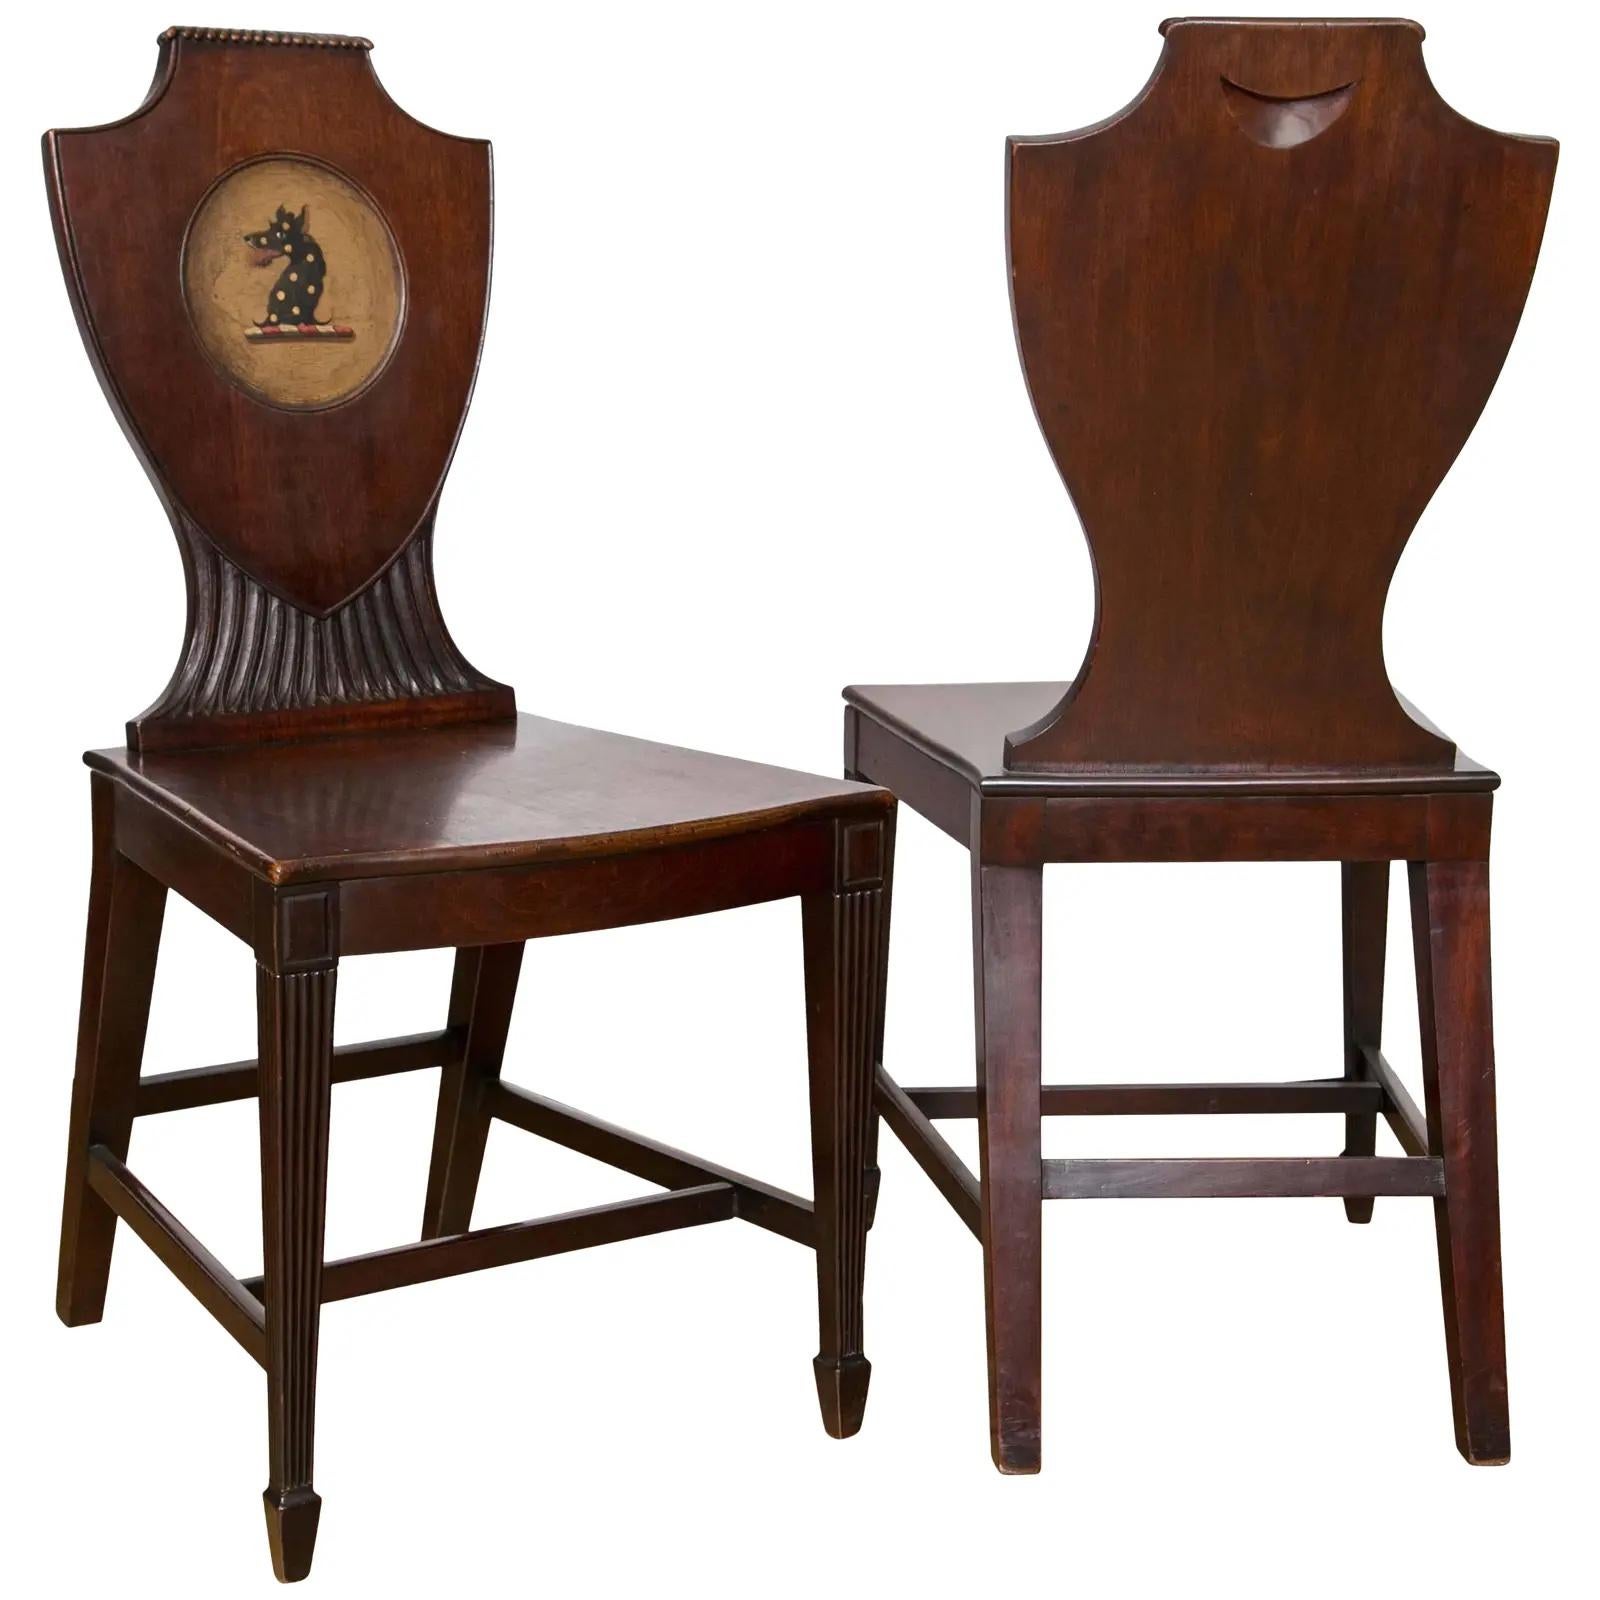 Pair of English Regency Era Painted Mahogany Hall Chairs For Sale 4